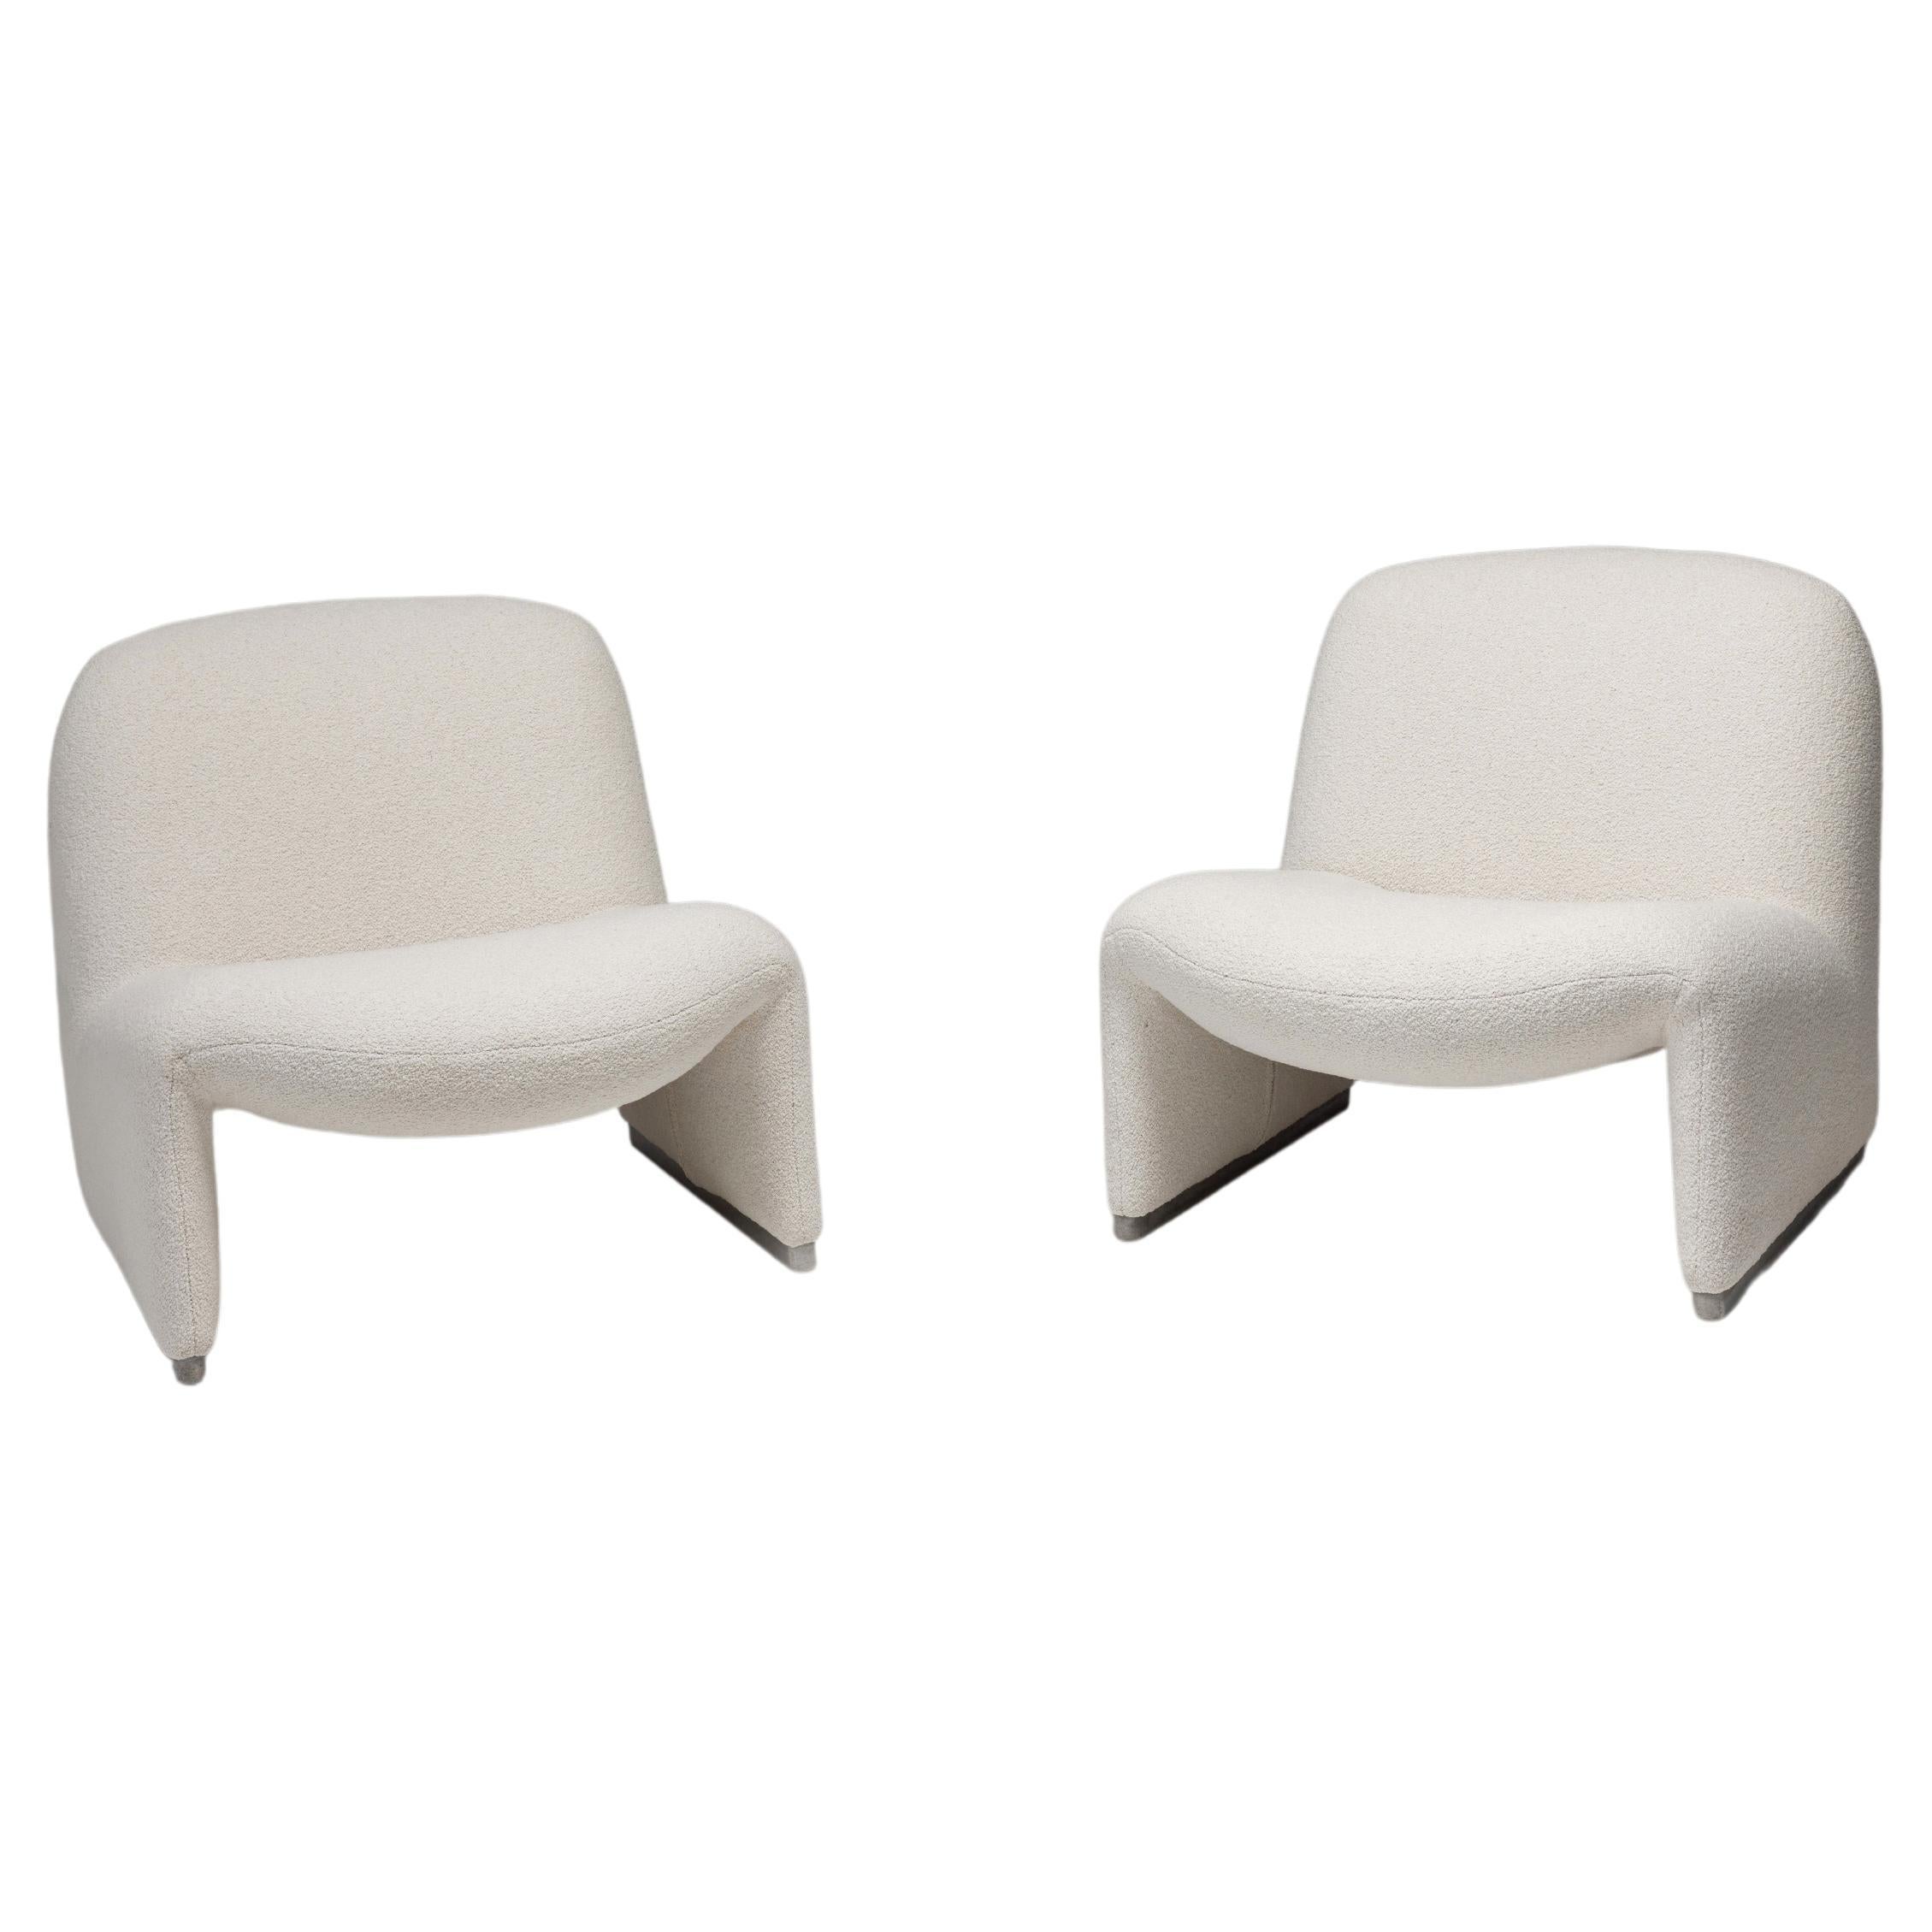 Vintage Alky Chairs in Off-White Fabric by Giancarlo Piretti for Artifort, 1970s